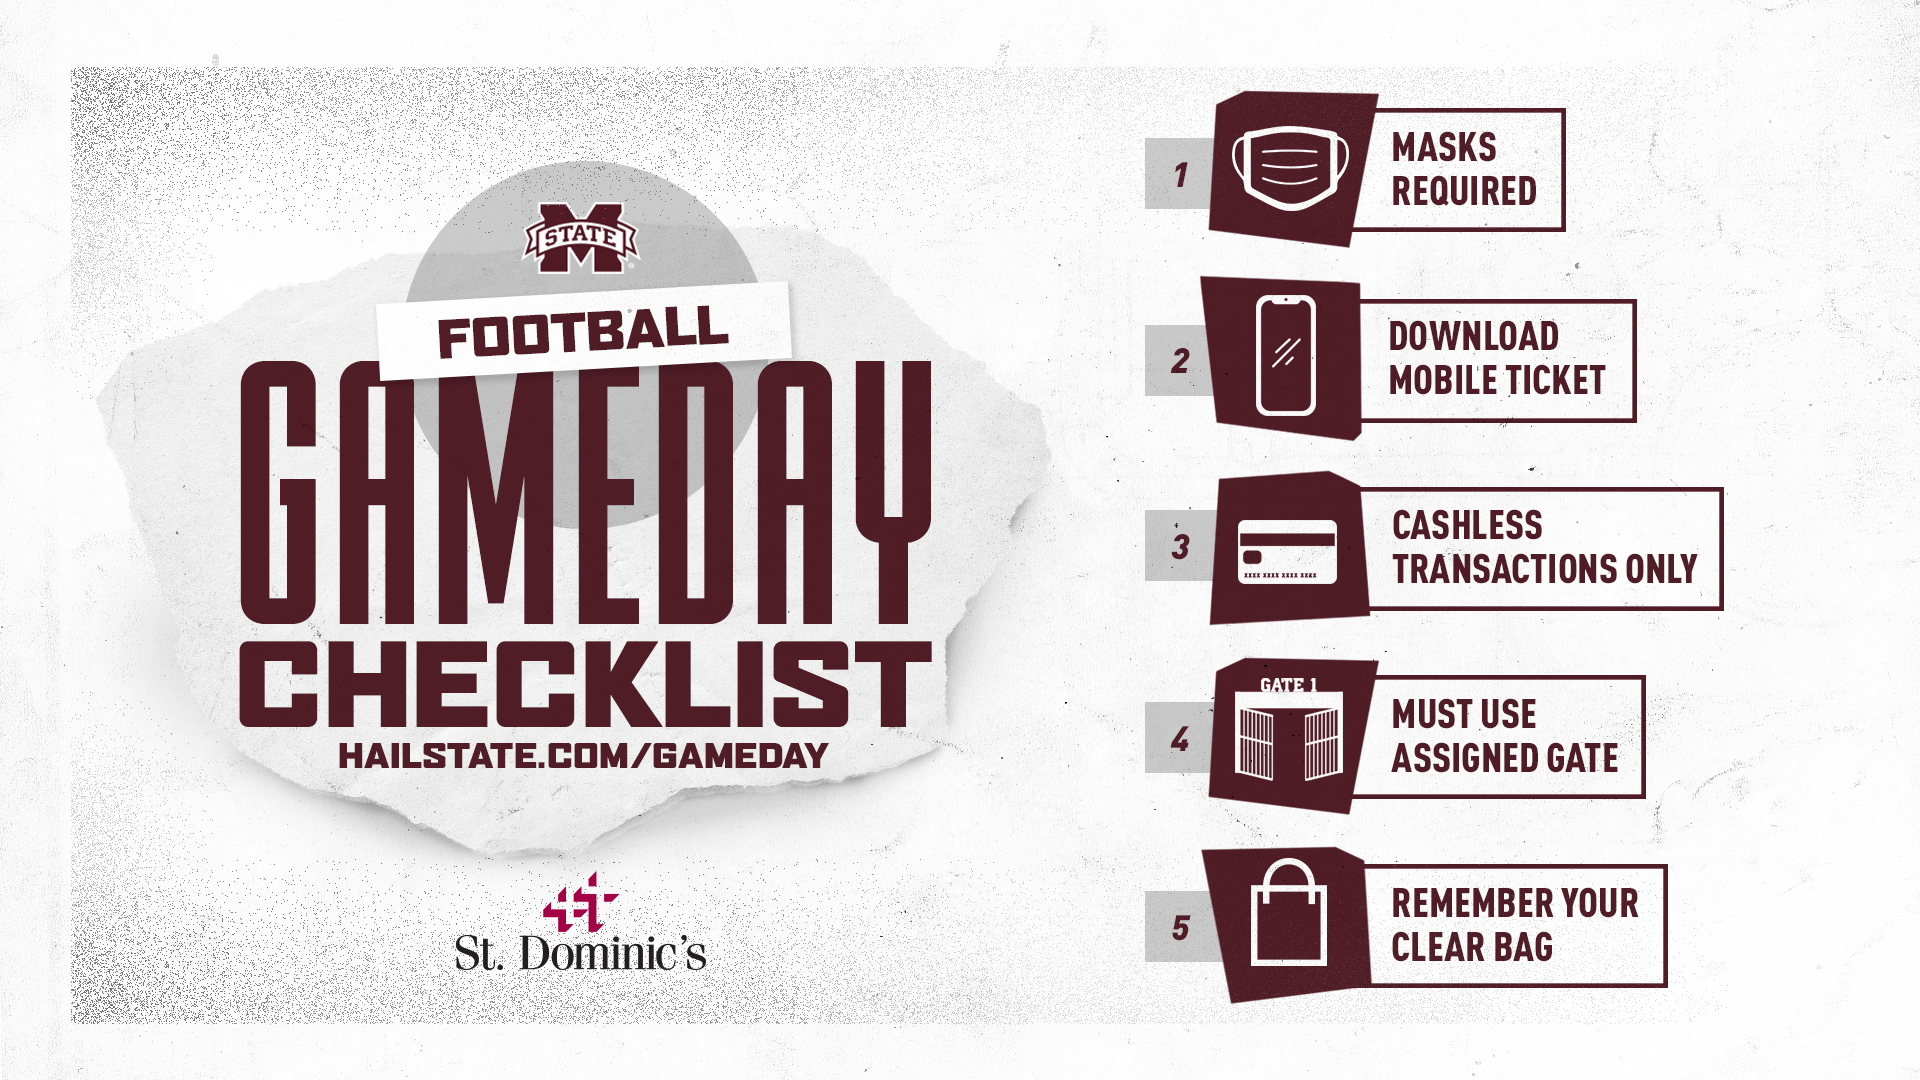 Maroon, white and gray graphic reminding MSU football fans about face masks, mobile tickets, cashless transactions, gate entry and clear bag policy